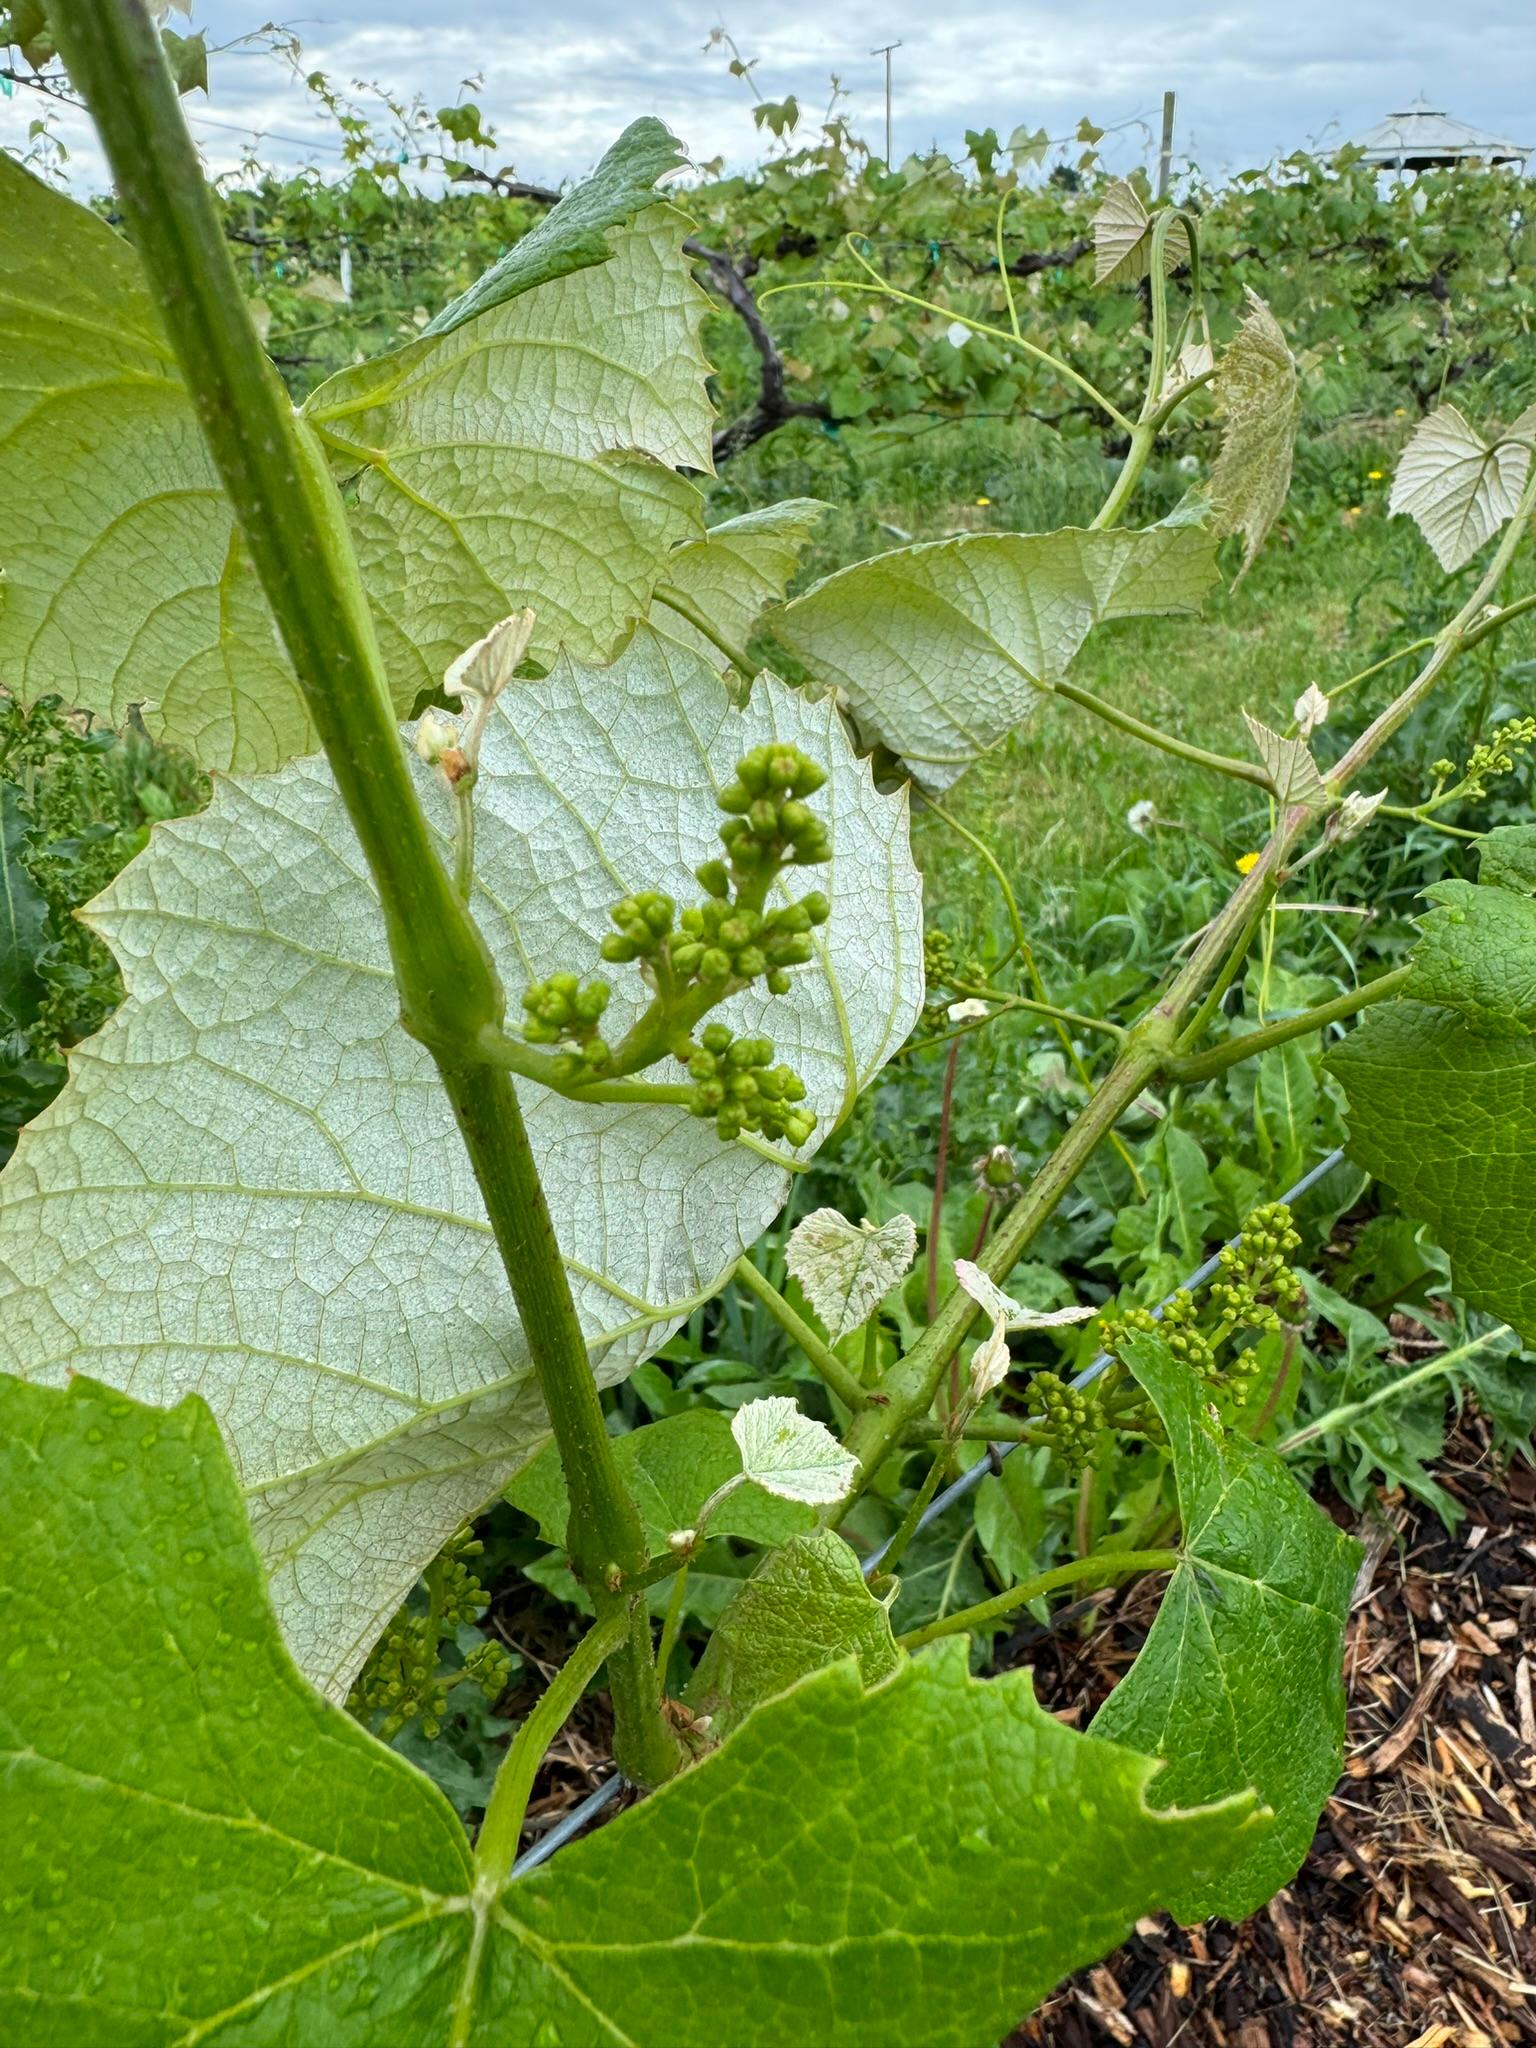 Grapes growing.